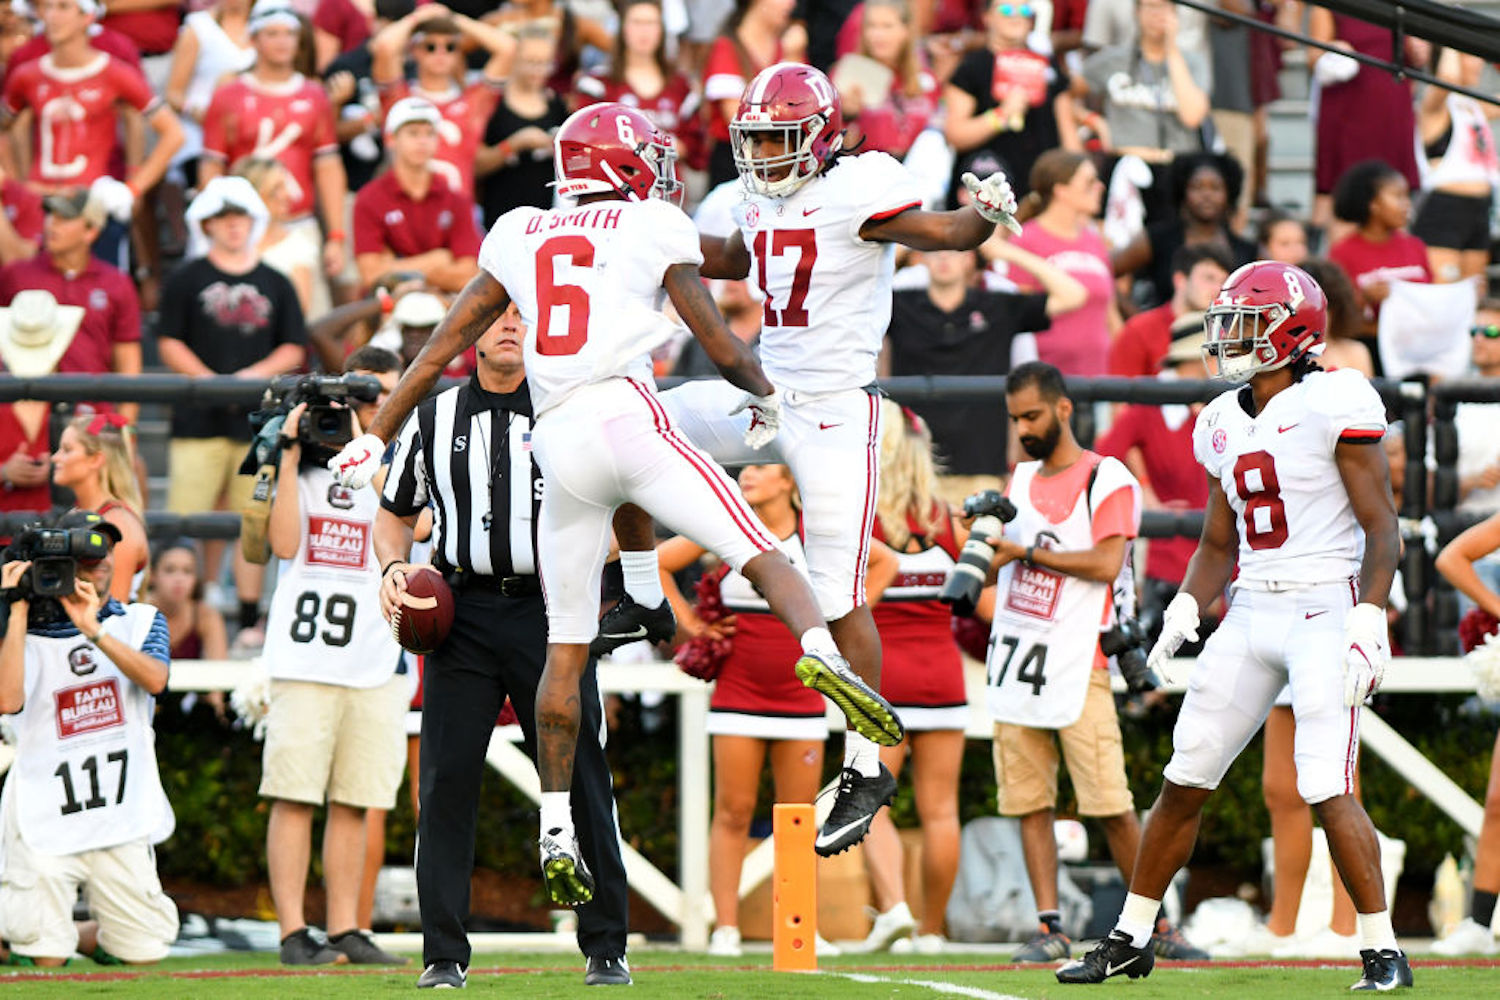 DeVonta Smith is most likely going to win the 2020 Heisman Trophy, but he isn't even the best wide receiver on his team this season.